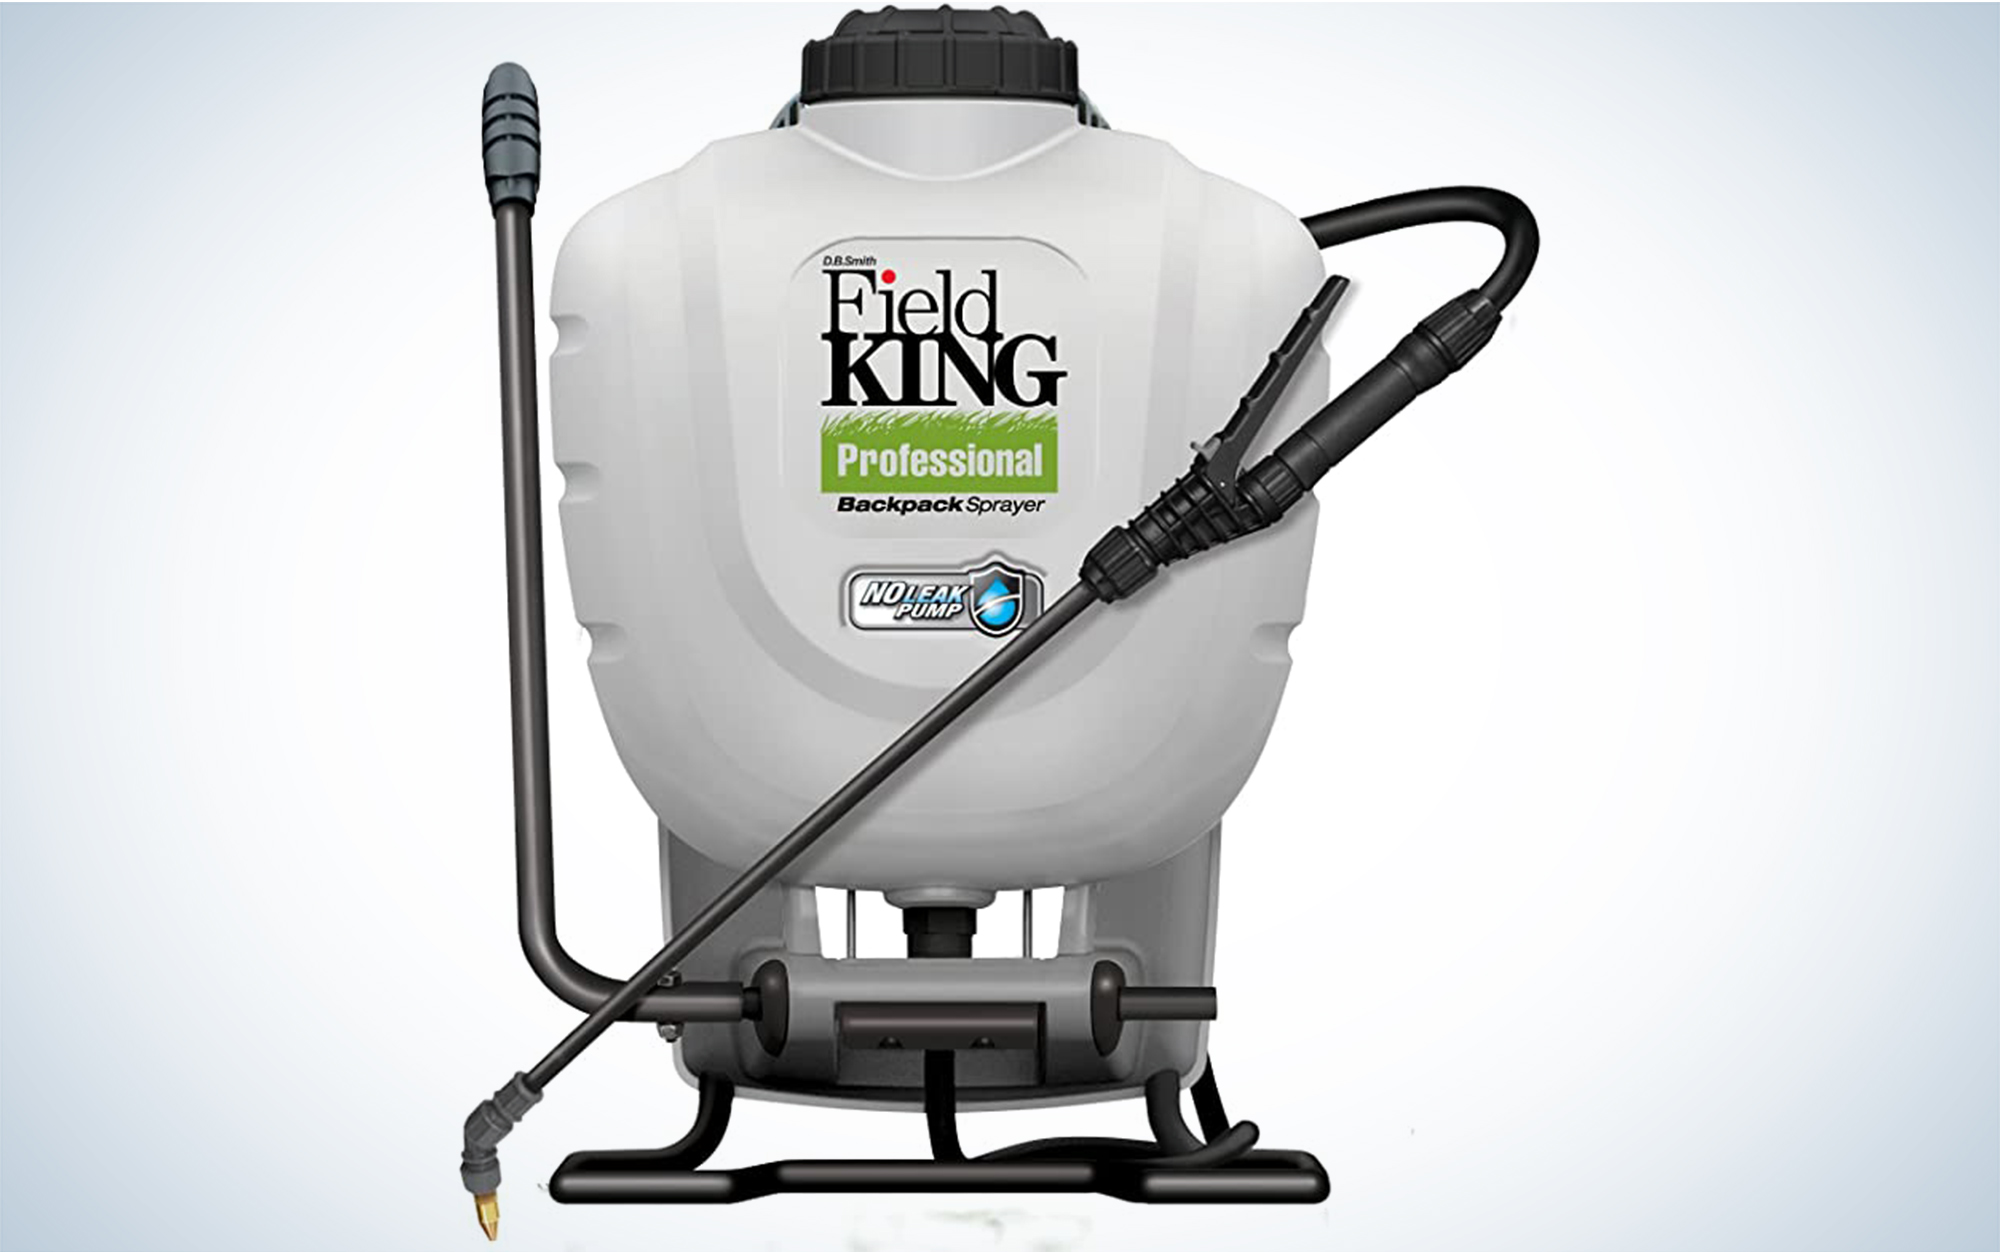 Tomahawk Power 5 gal. GAS Power Backpack Sprayer with Twin Tip Nozzle for Pesticide, Disinfectant and Fertilizer